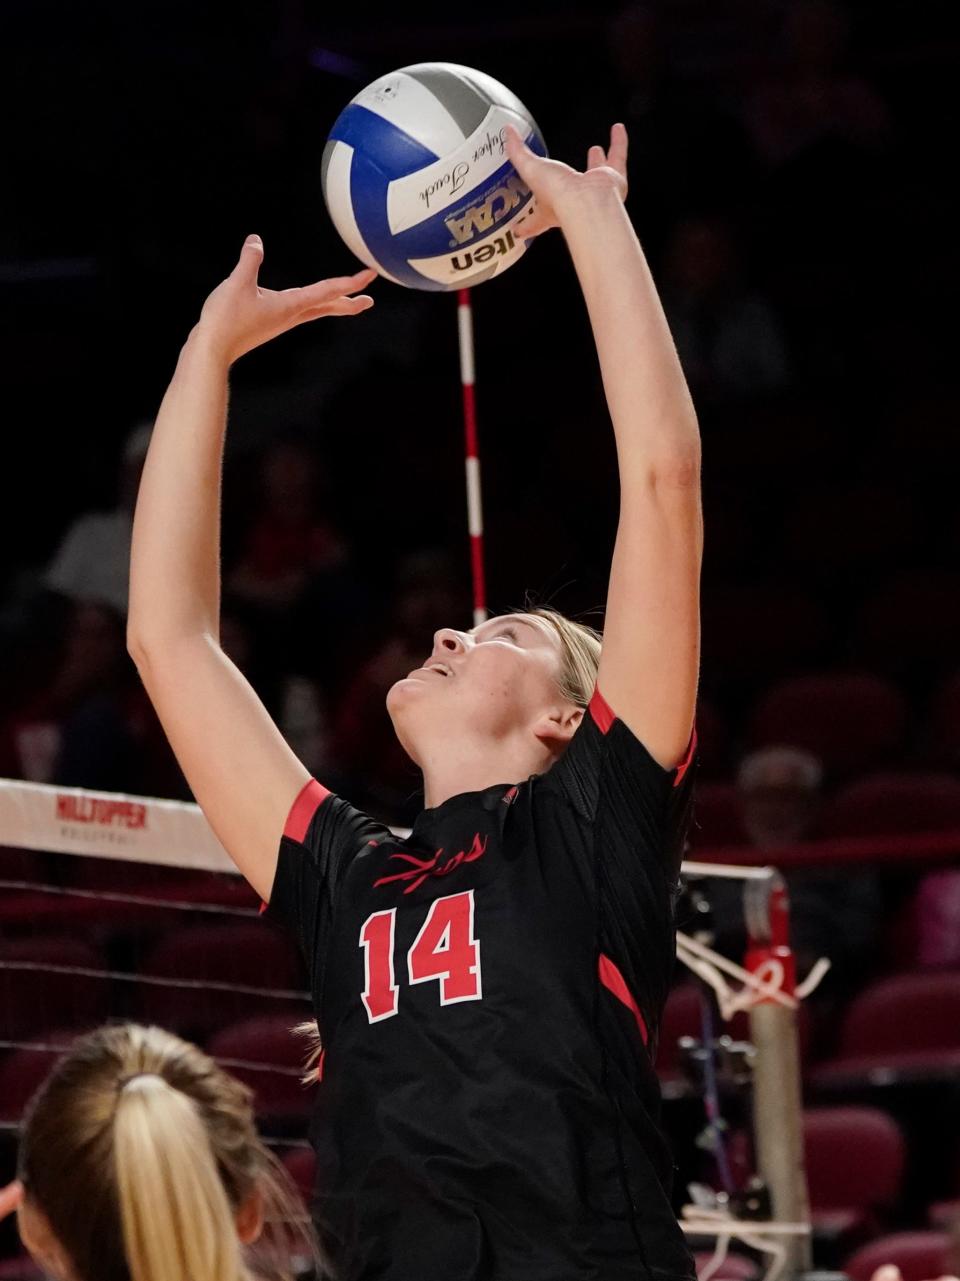 Setter Callie Bauer (14) of the Hilltoppers during a game at E.A Diddle Arena on October 29, 2022 in Bowling Green, KY. Photo by Wyatt Richardson/WKU Athletics